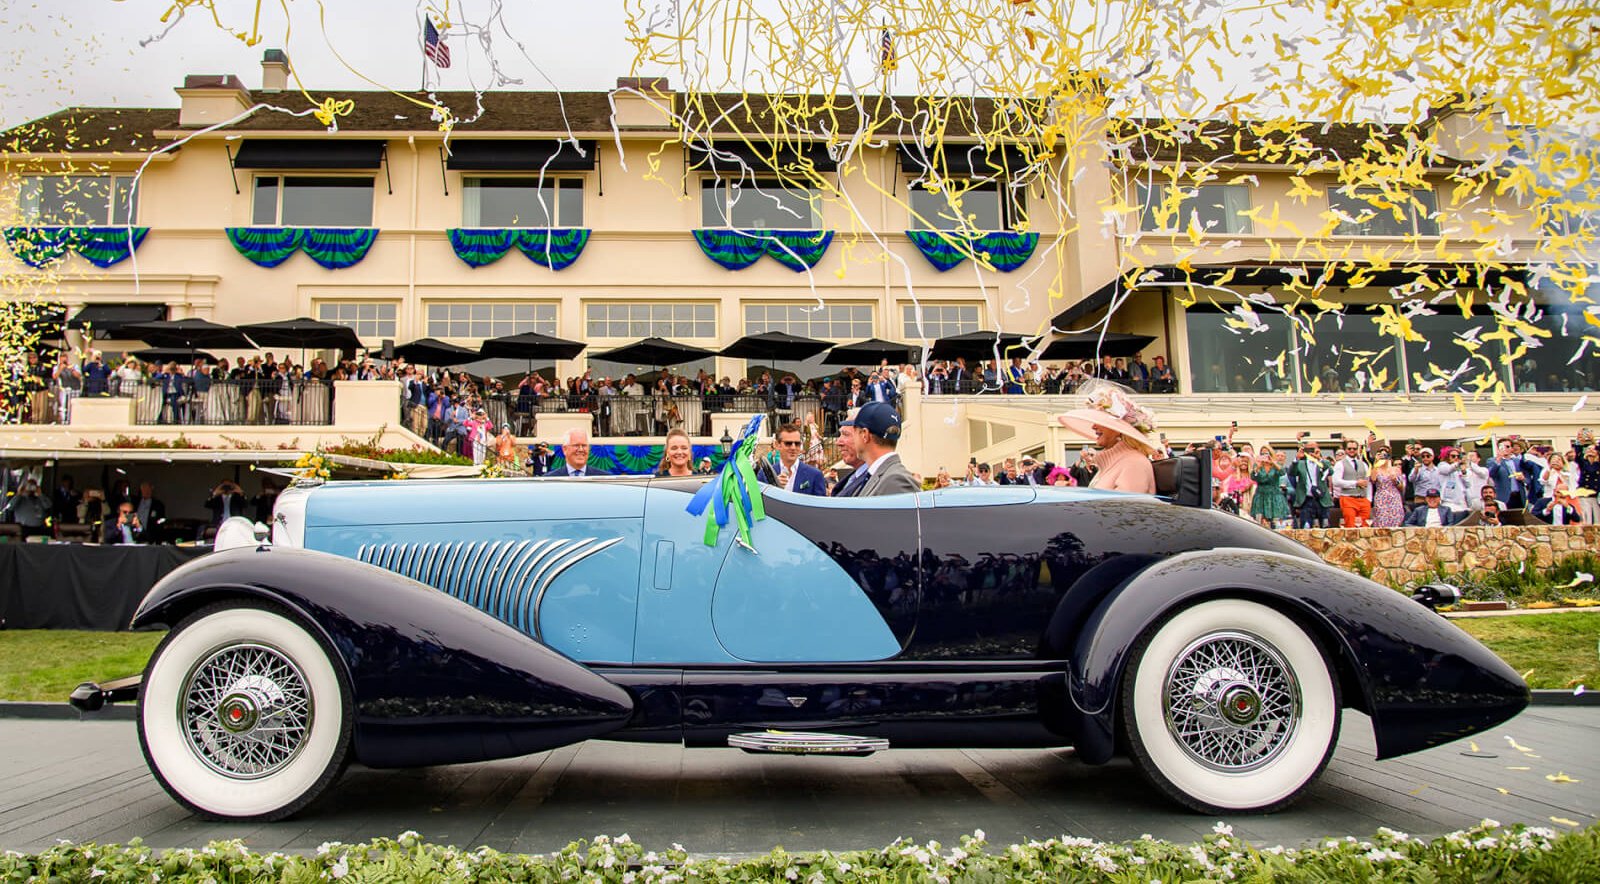 Yesterday, the car that was named Best of Show of the 2022 Pebble Beach Concours d' Elegance was a stunning 1932 Duesenberg Model J Figoni Sports Torpedo owned by Lee Anderson of Naples, FL.